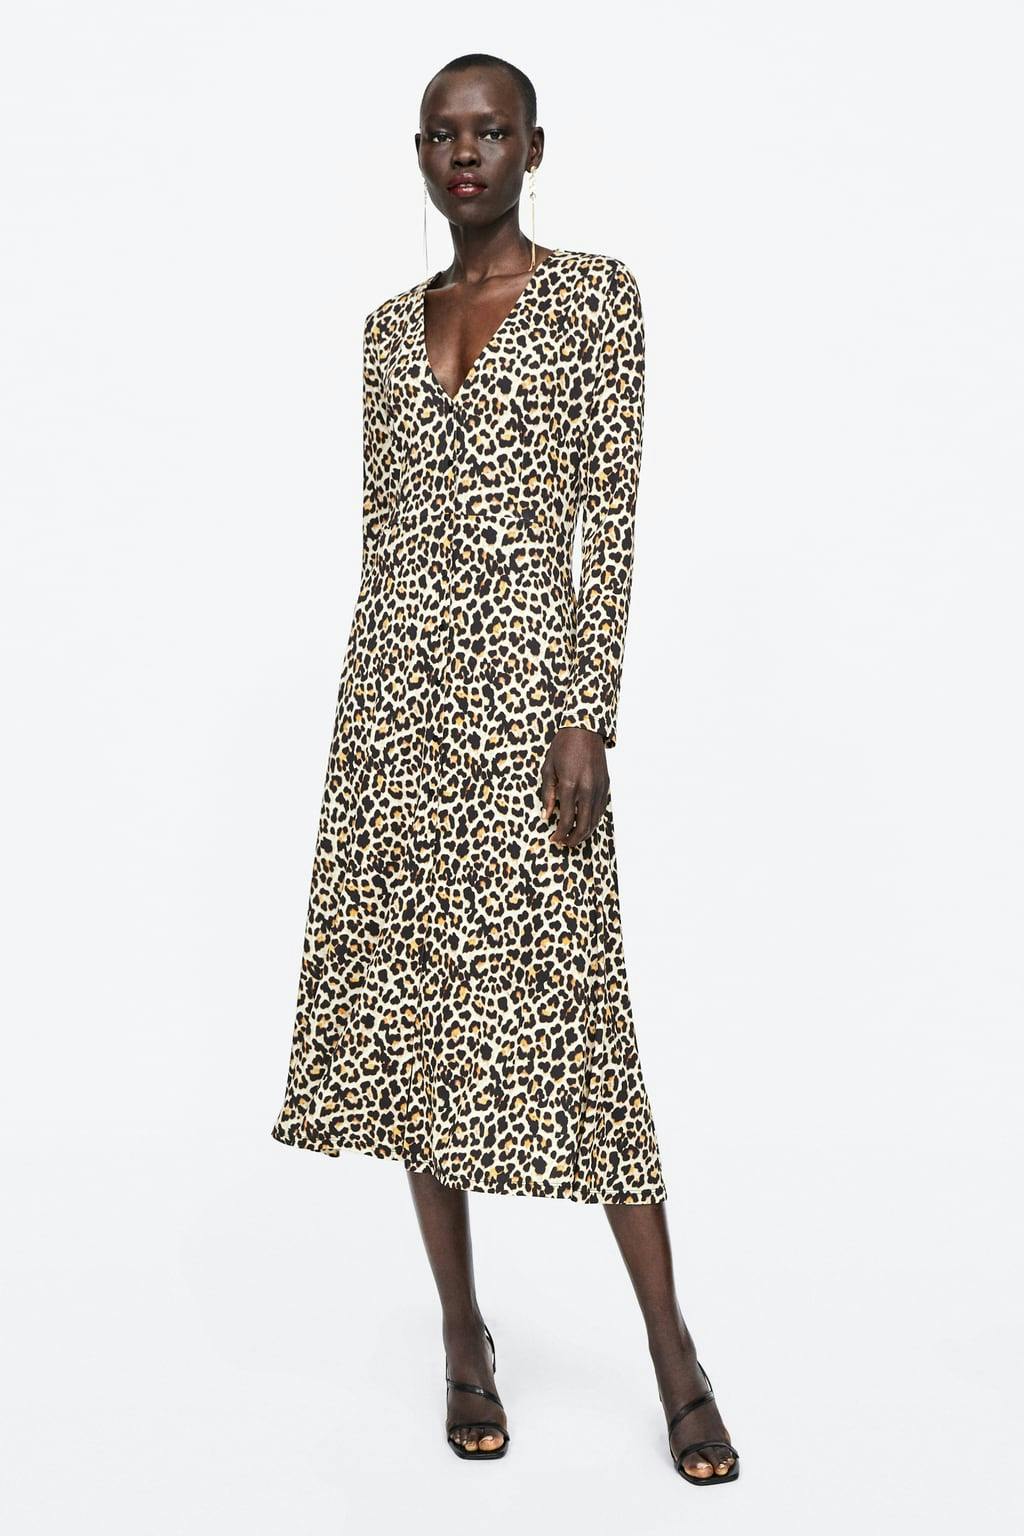 15 animal print dresses that are perfect for any weather